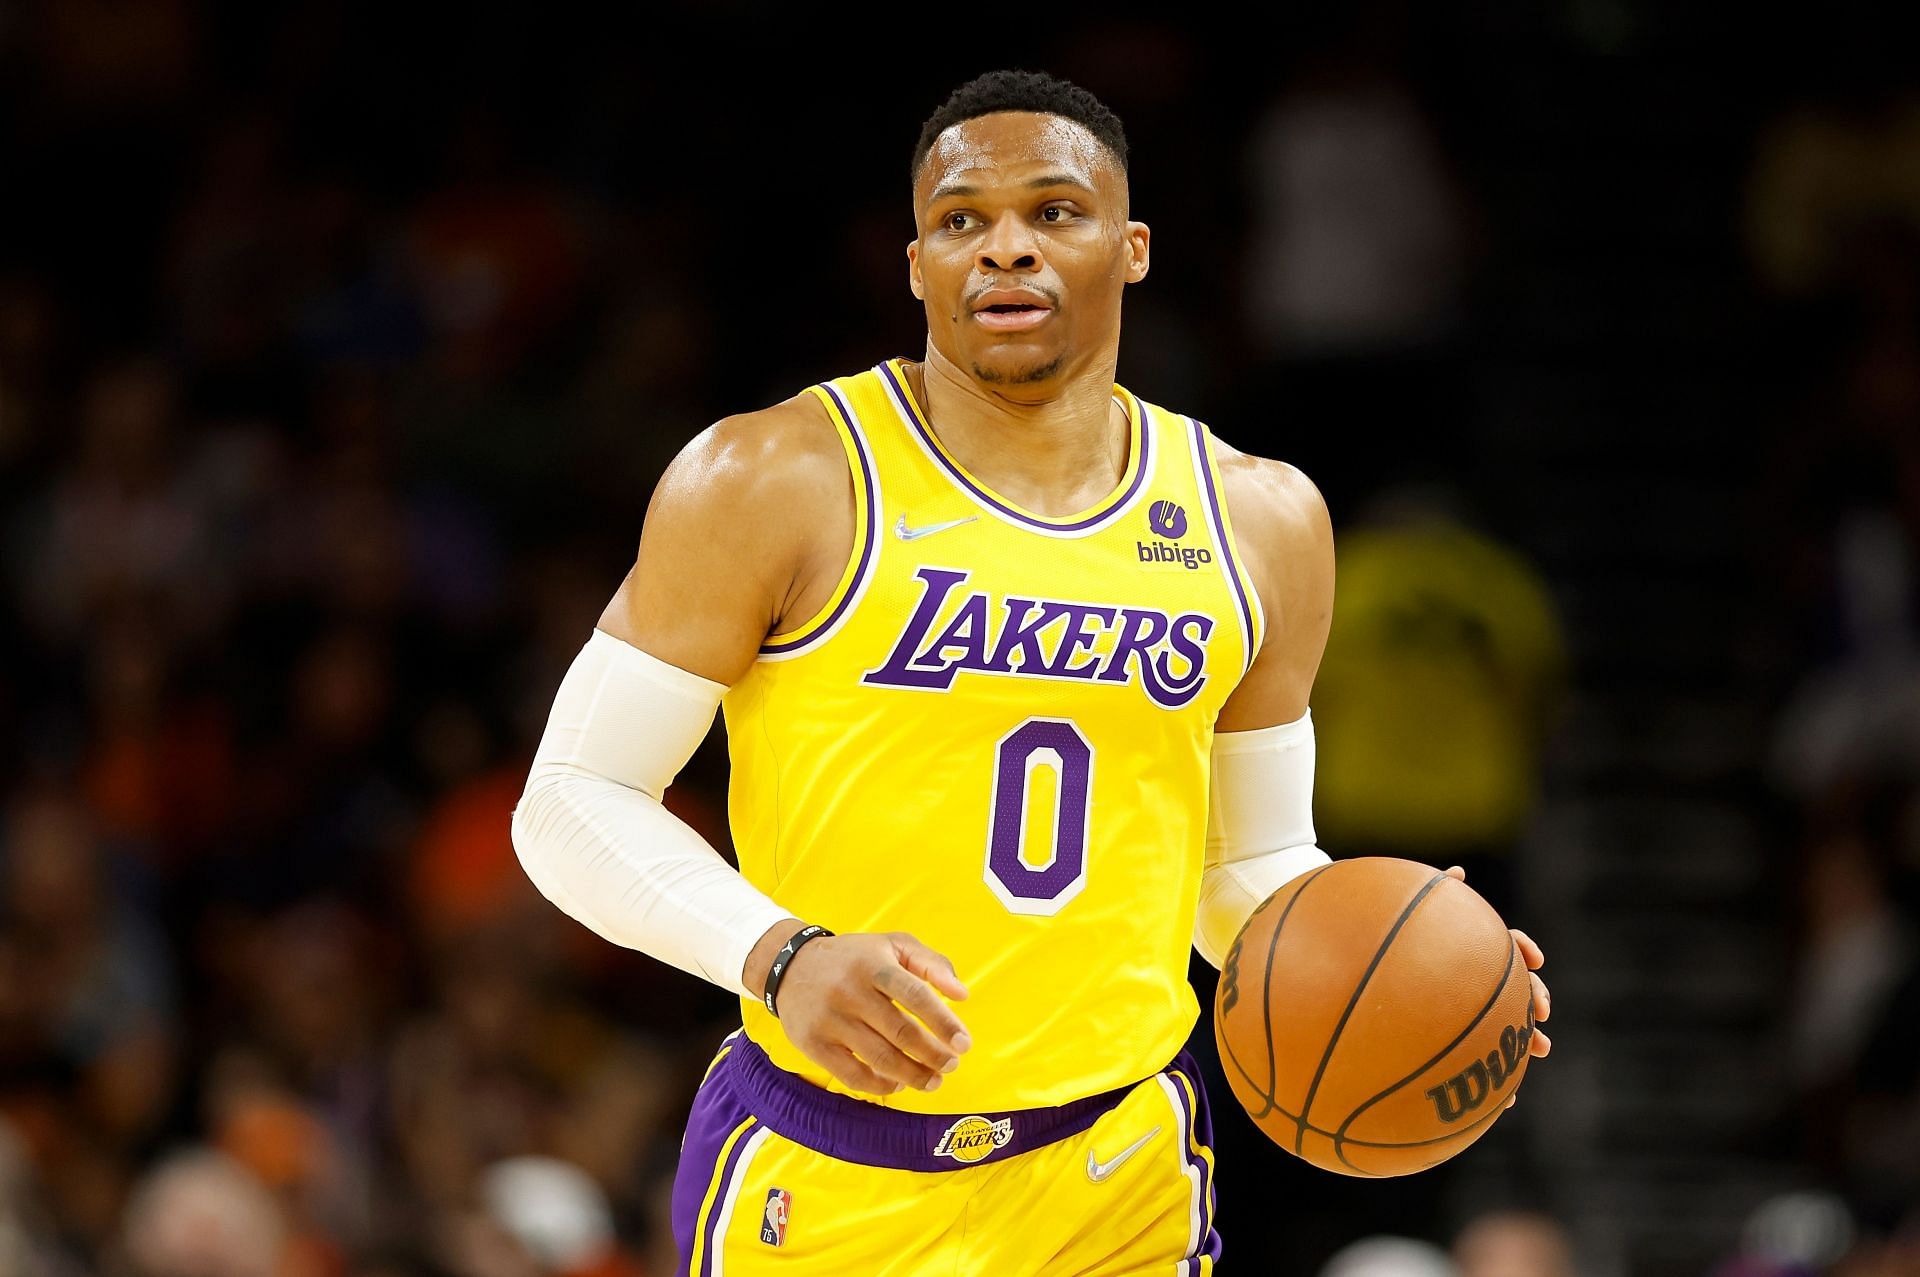 Russell Westbrook of the LA Lakers handles the ball on April 5 in Phoenix, Arizona.